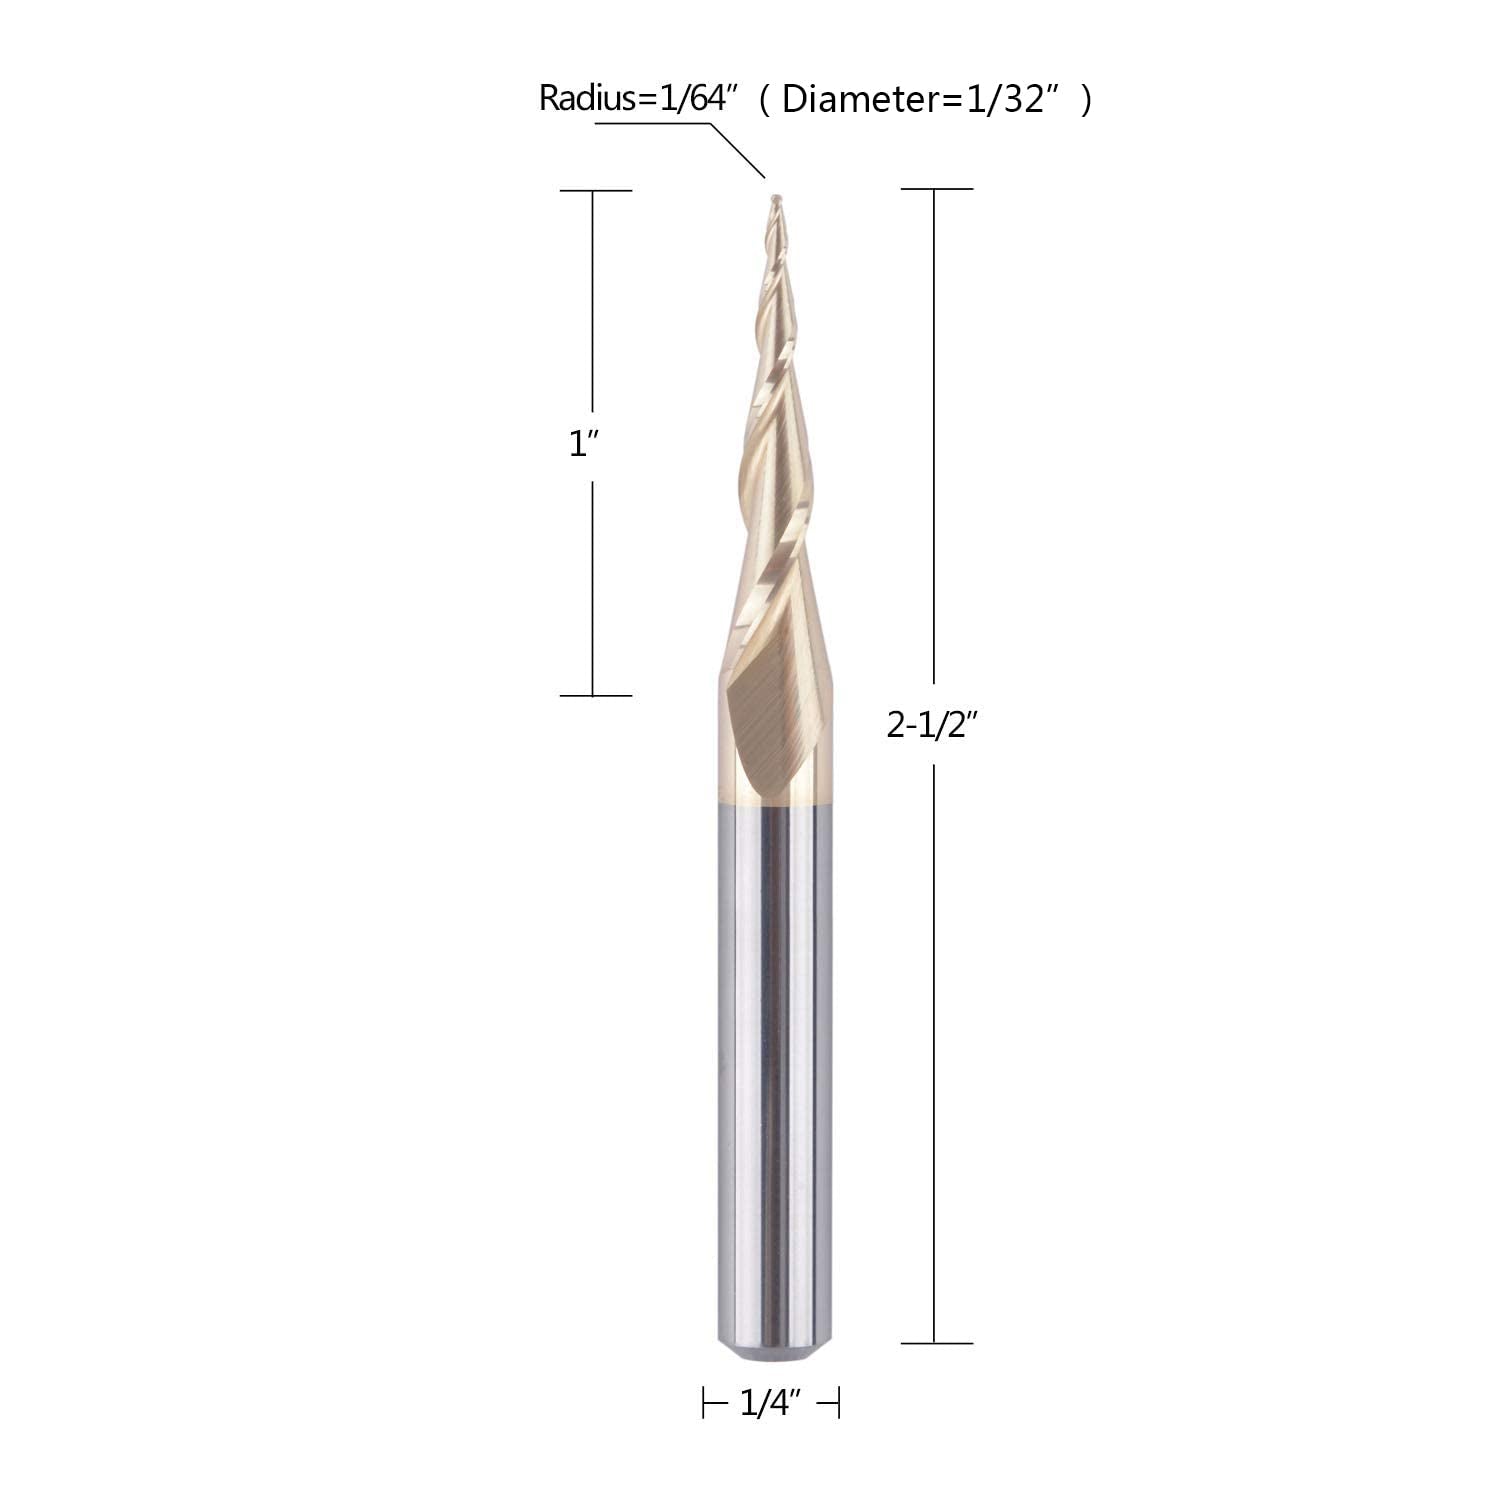 SpeTool 1/64" Radius Tapered Ball Nose Endmill CNC Carving ZrN Coating